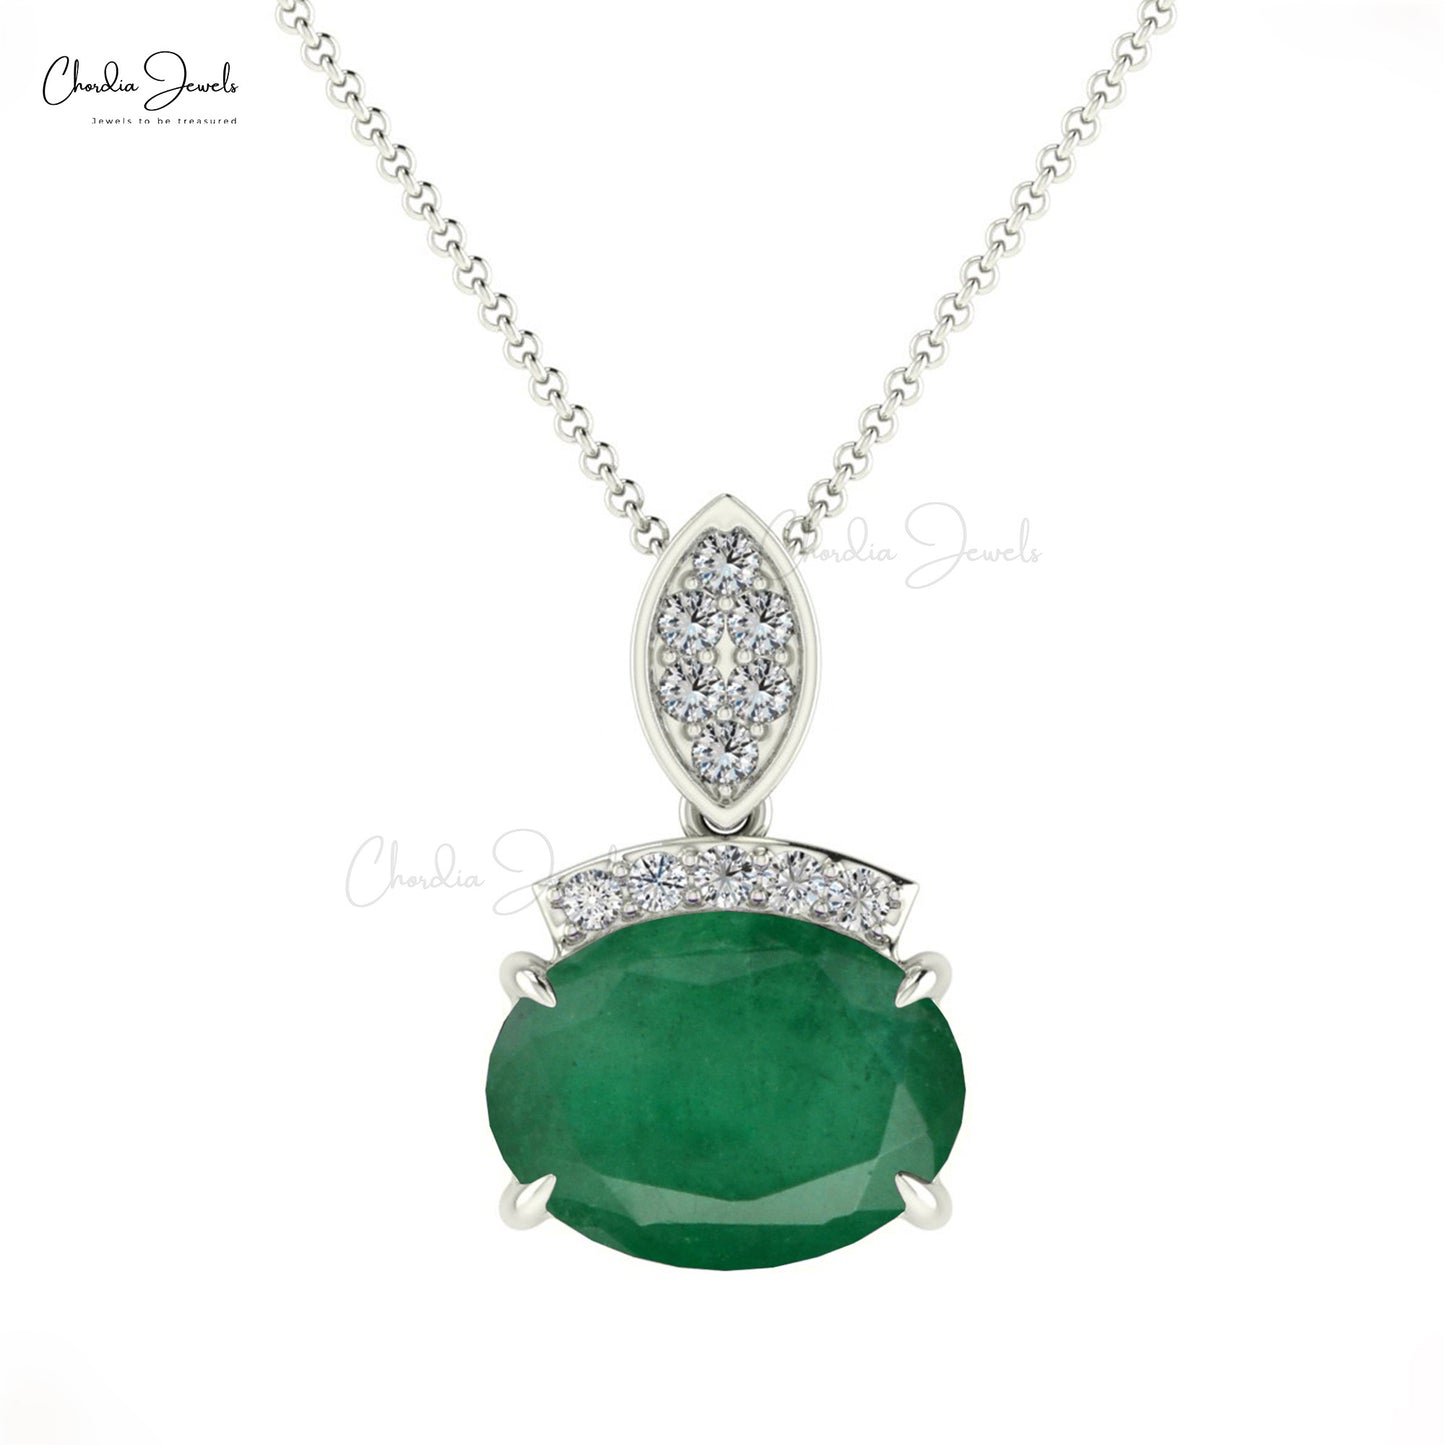 Load image into Gallery viewer, Dainty Pendant With Diamond Accents 14k Solid Gold Emerald Gemstone Handcrafted Pendant
